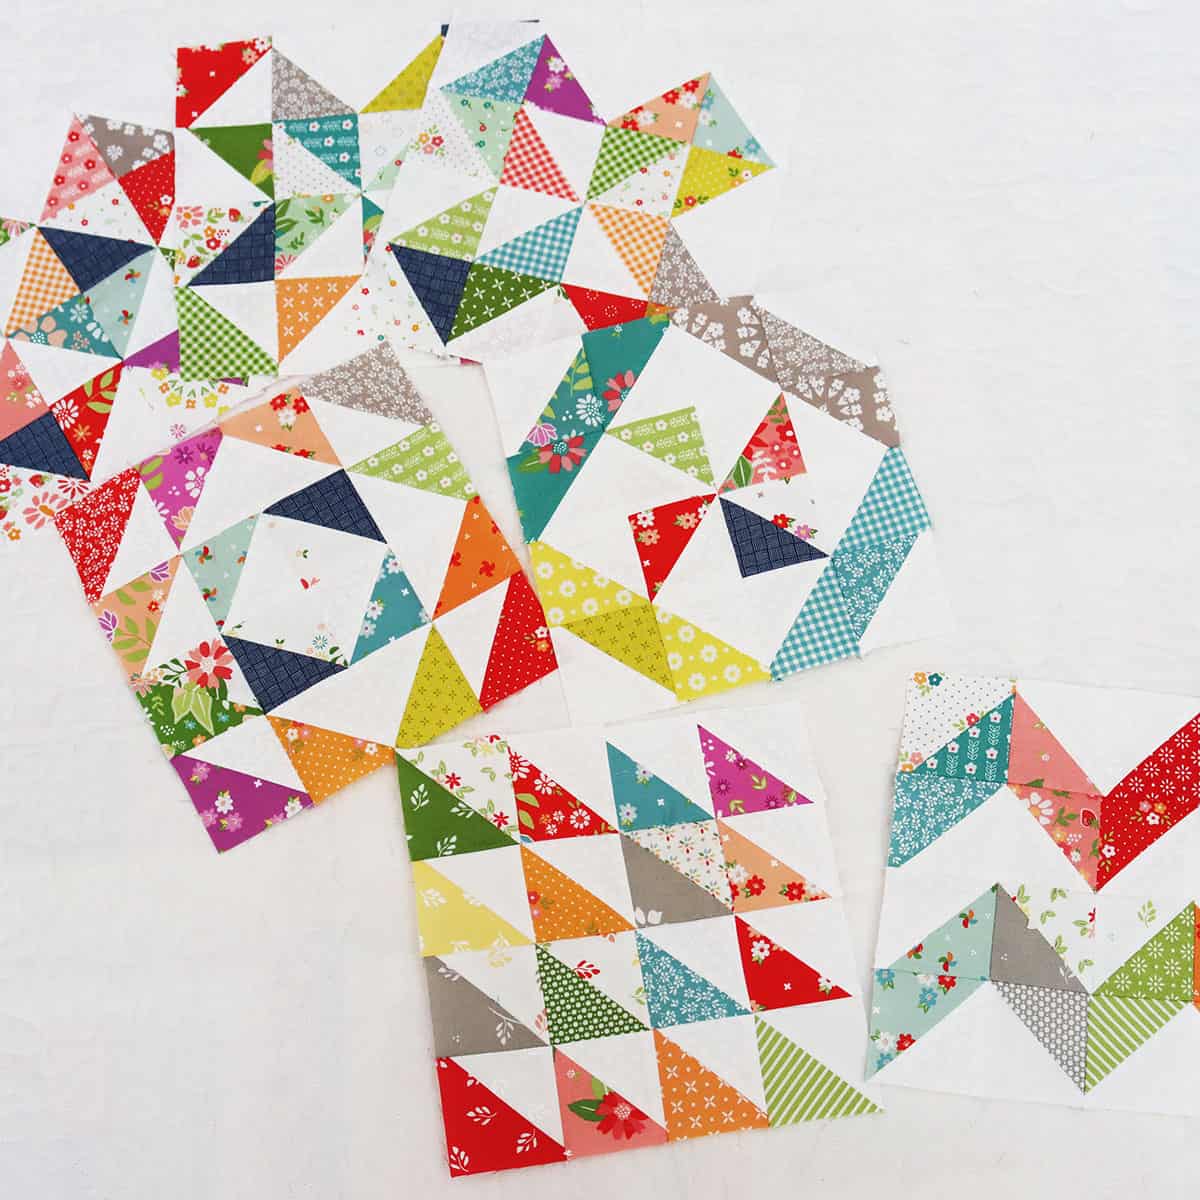 Scrappy Half Square Triangle blocks by Sherri at A Quilting Life